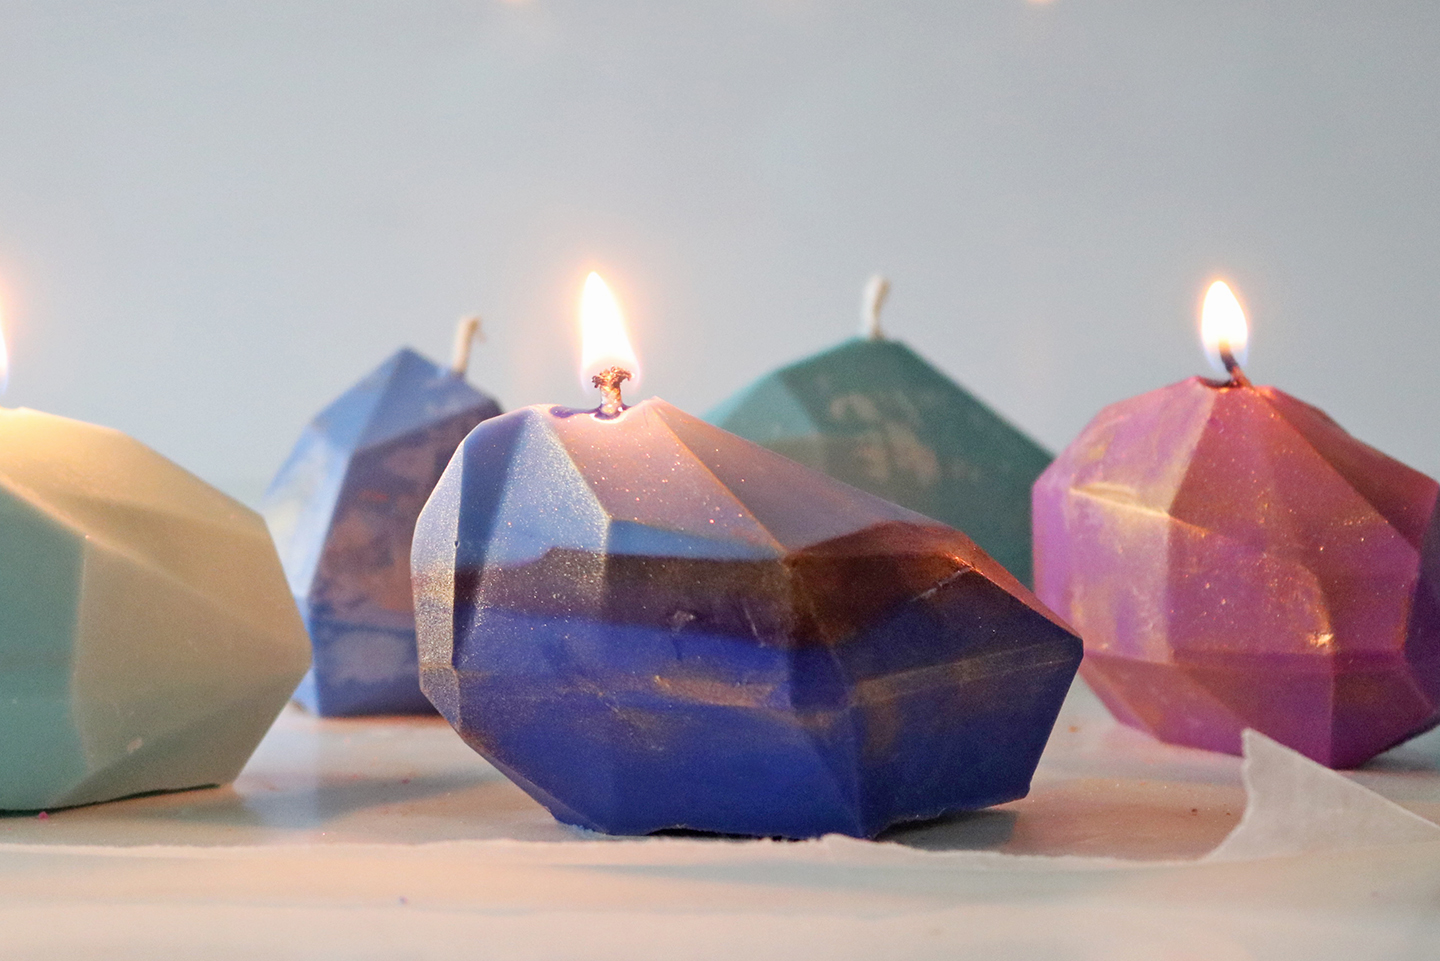 How to Make Gemstone Candles Using Silicone Molds